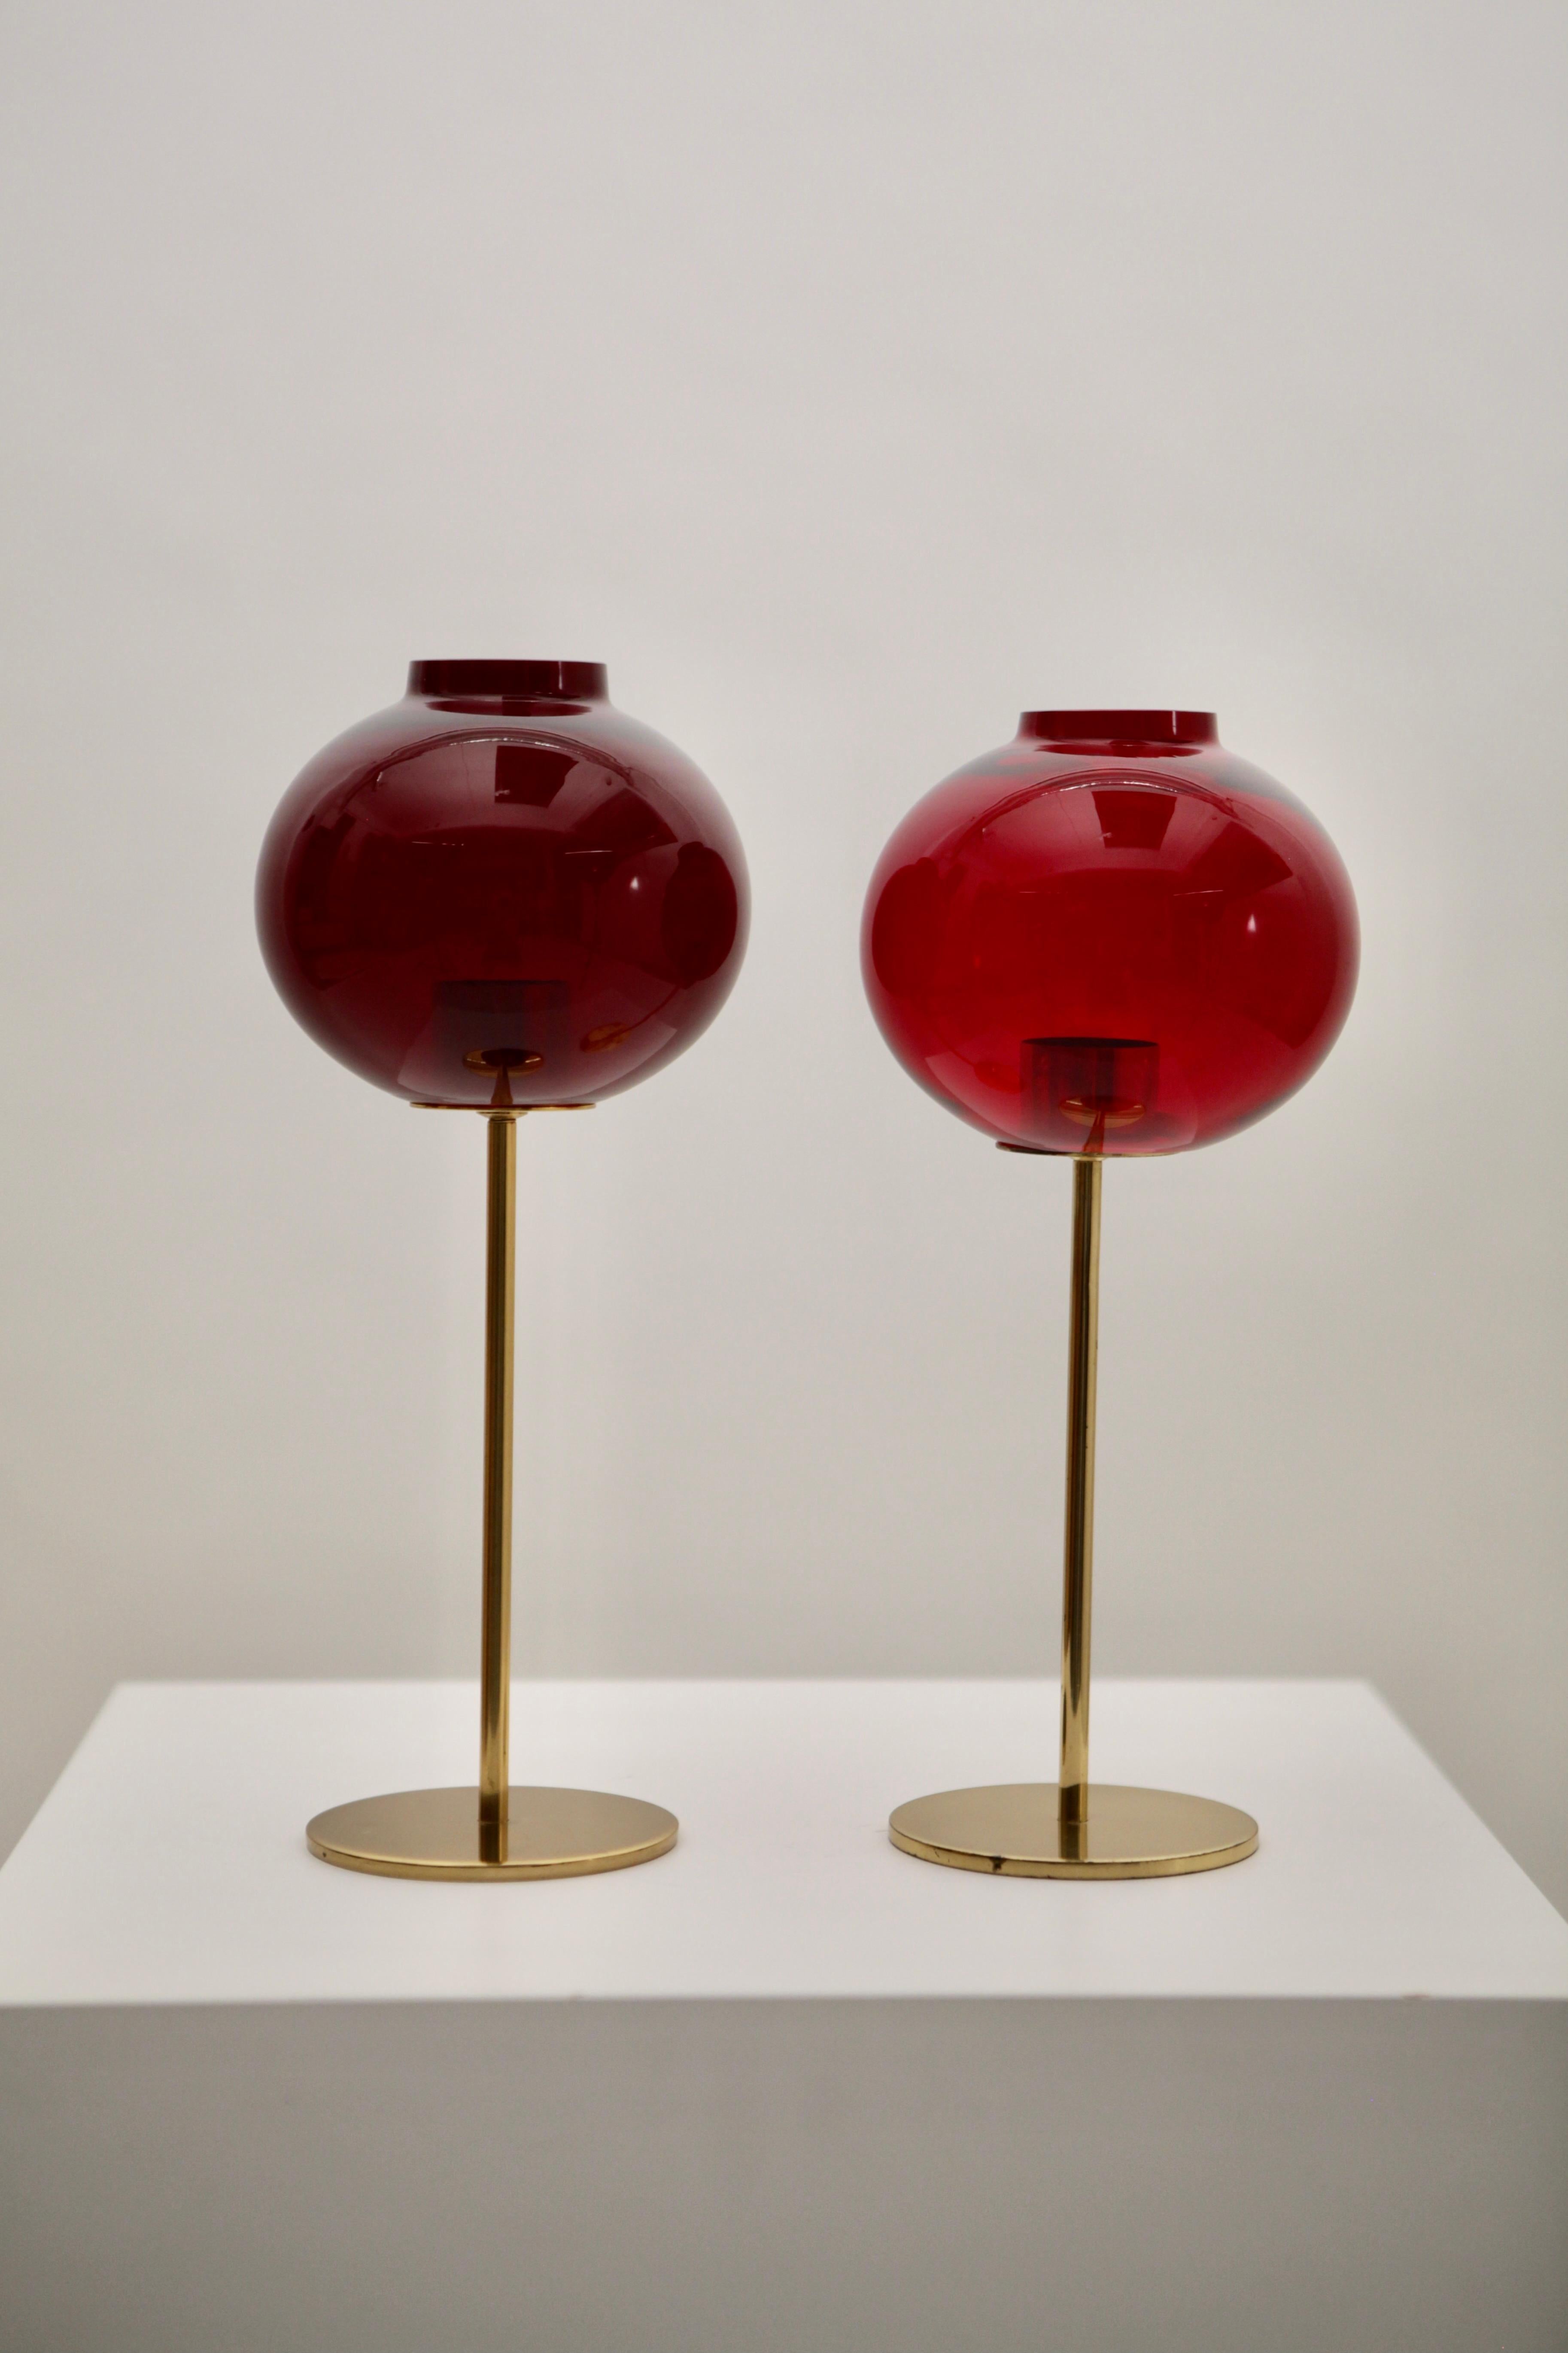 A pair of red colored glas and brass candle lamps by Hans-Agne Jakobssen.
Designed and manufactured in Sweden in the 1960s.
Excellent vintage condition, no chips, the red colored glas is slightly different to each other, as well as the height